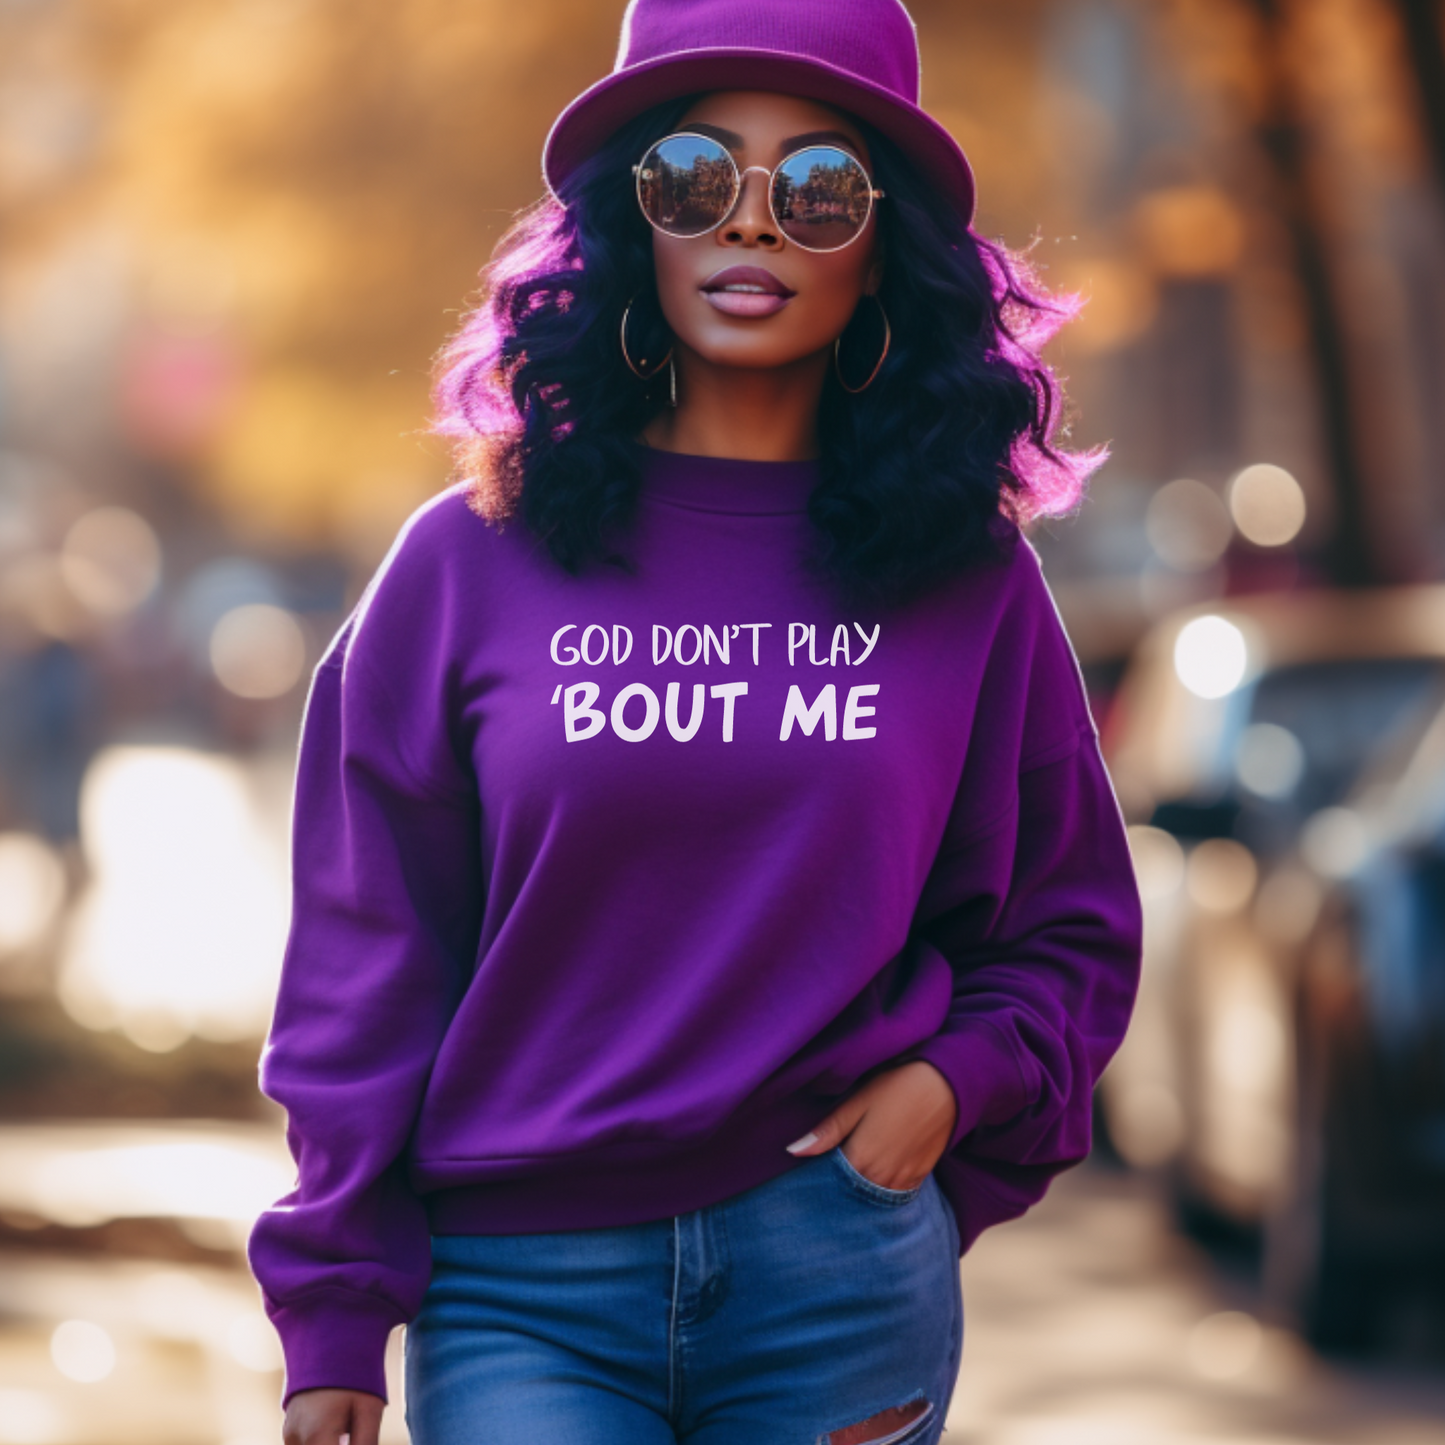 God don’t play about me Sweatshirt